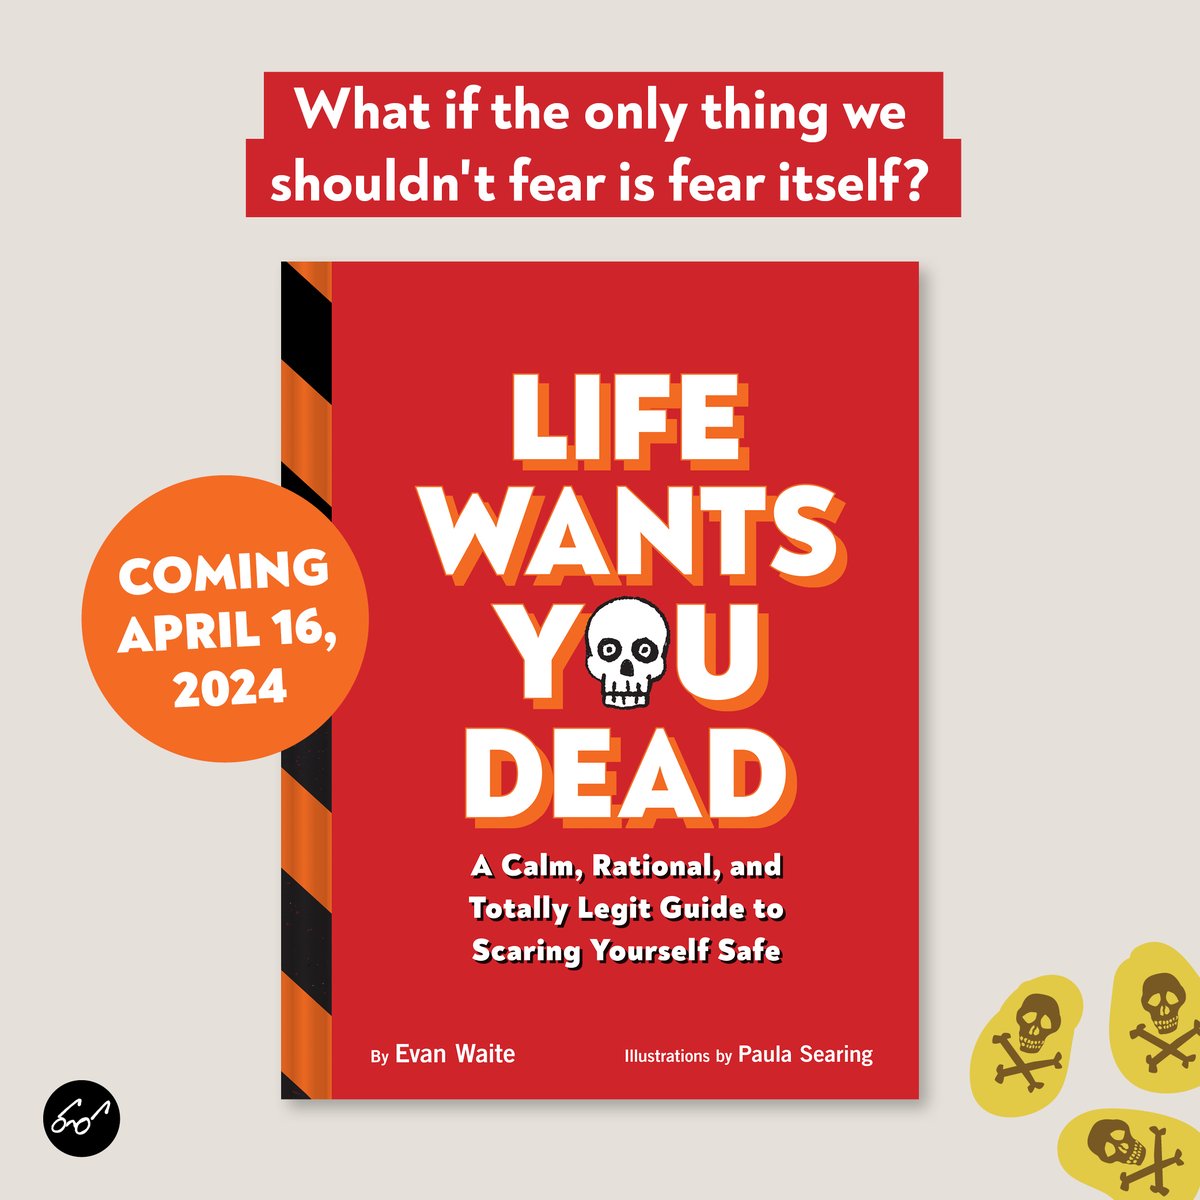 ATTN: Readers of nonsense My first humor book, LIFE WANTS YOU DEAD: A CALM, RATIONAL, AND TOTALLY LEGIT GUIDE TO SCARING YOURSELF SAFE, drops April 16th, 2024, avail for pre-order now. It’s got everything: Words, pages, TWO covers! It’s my best work, can’t wait for you to see it.